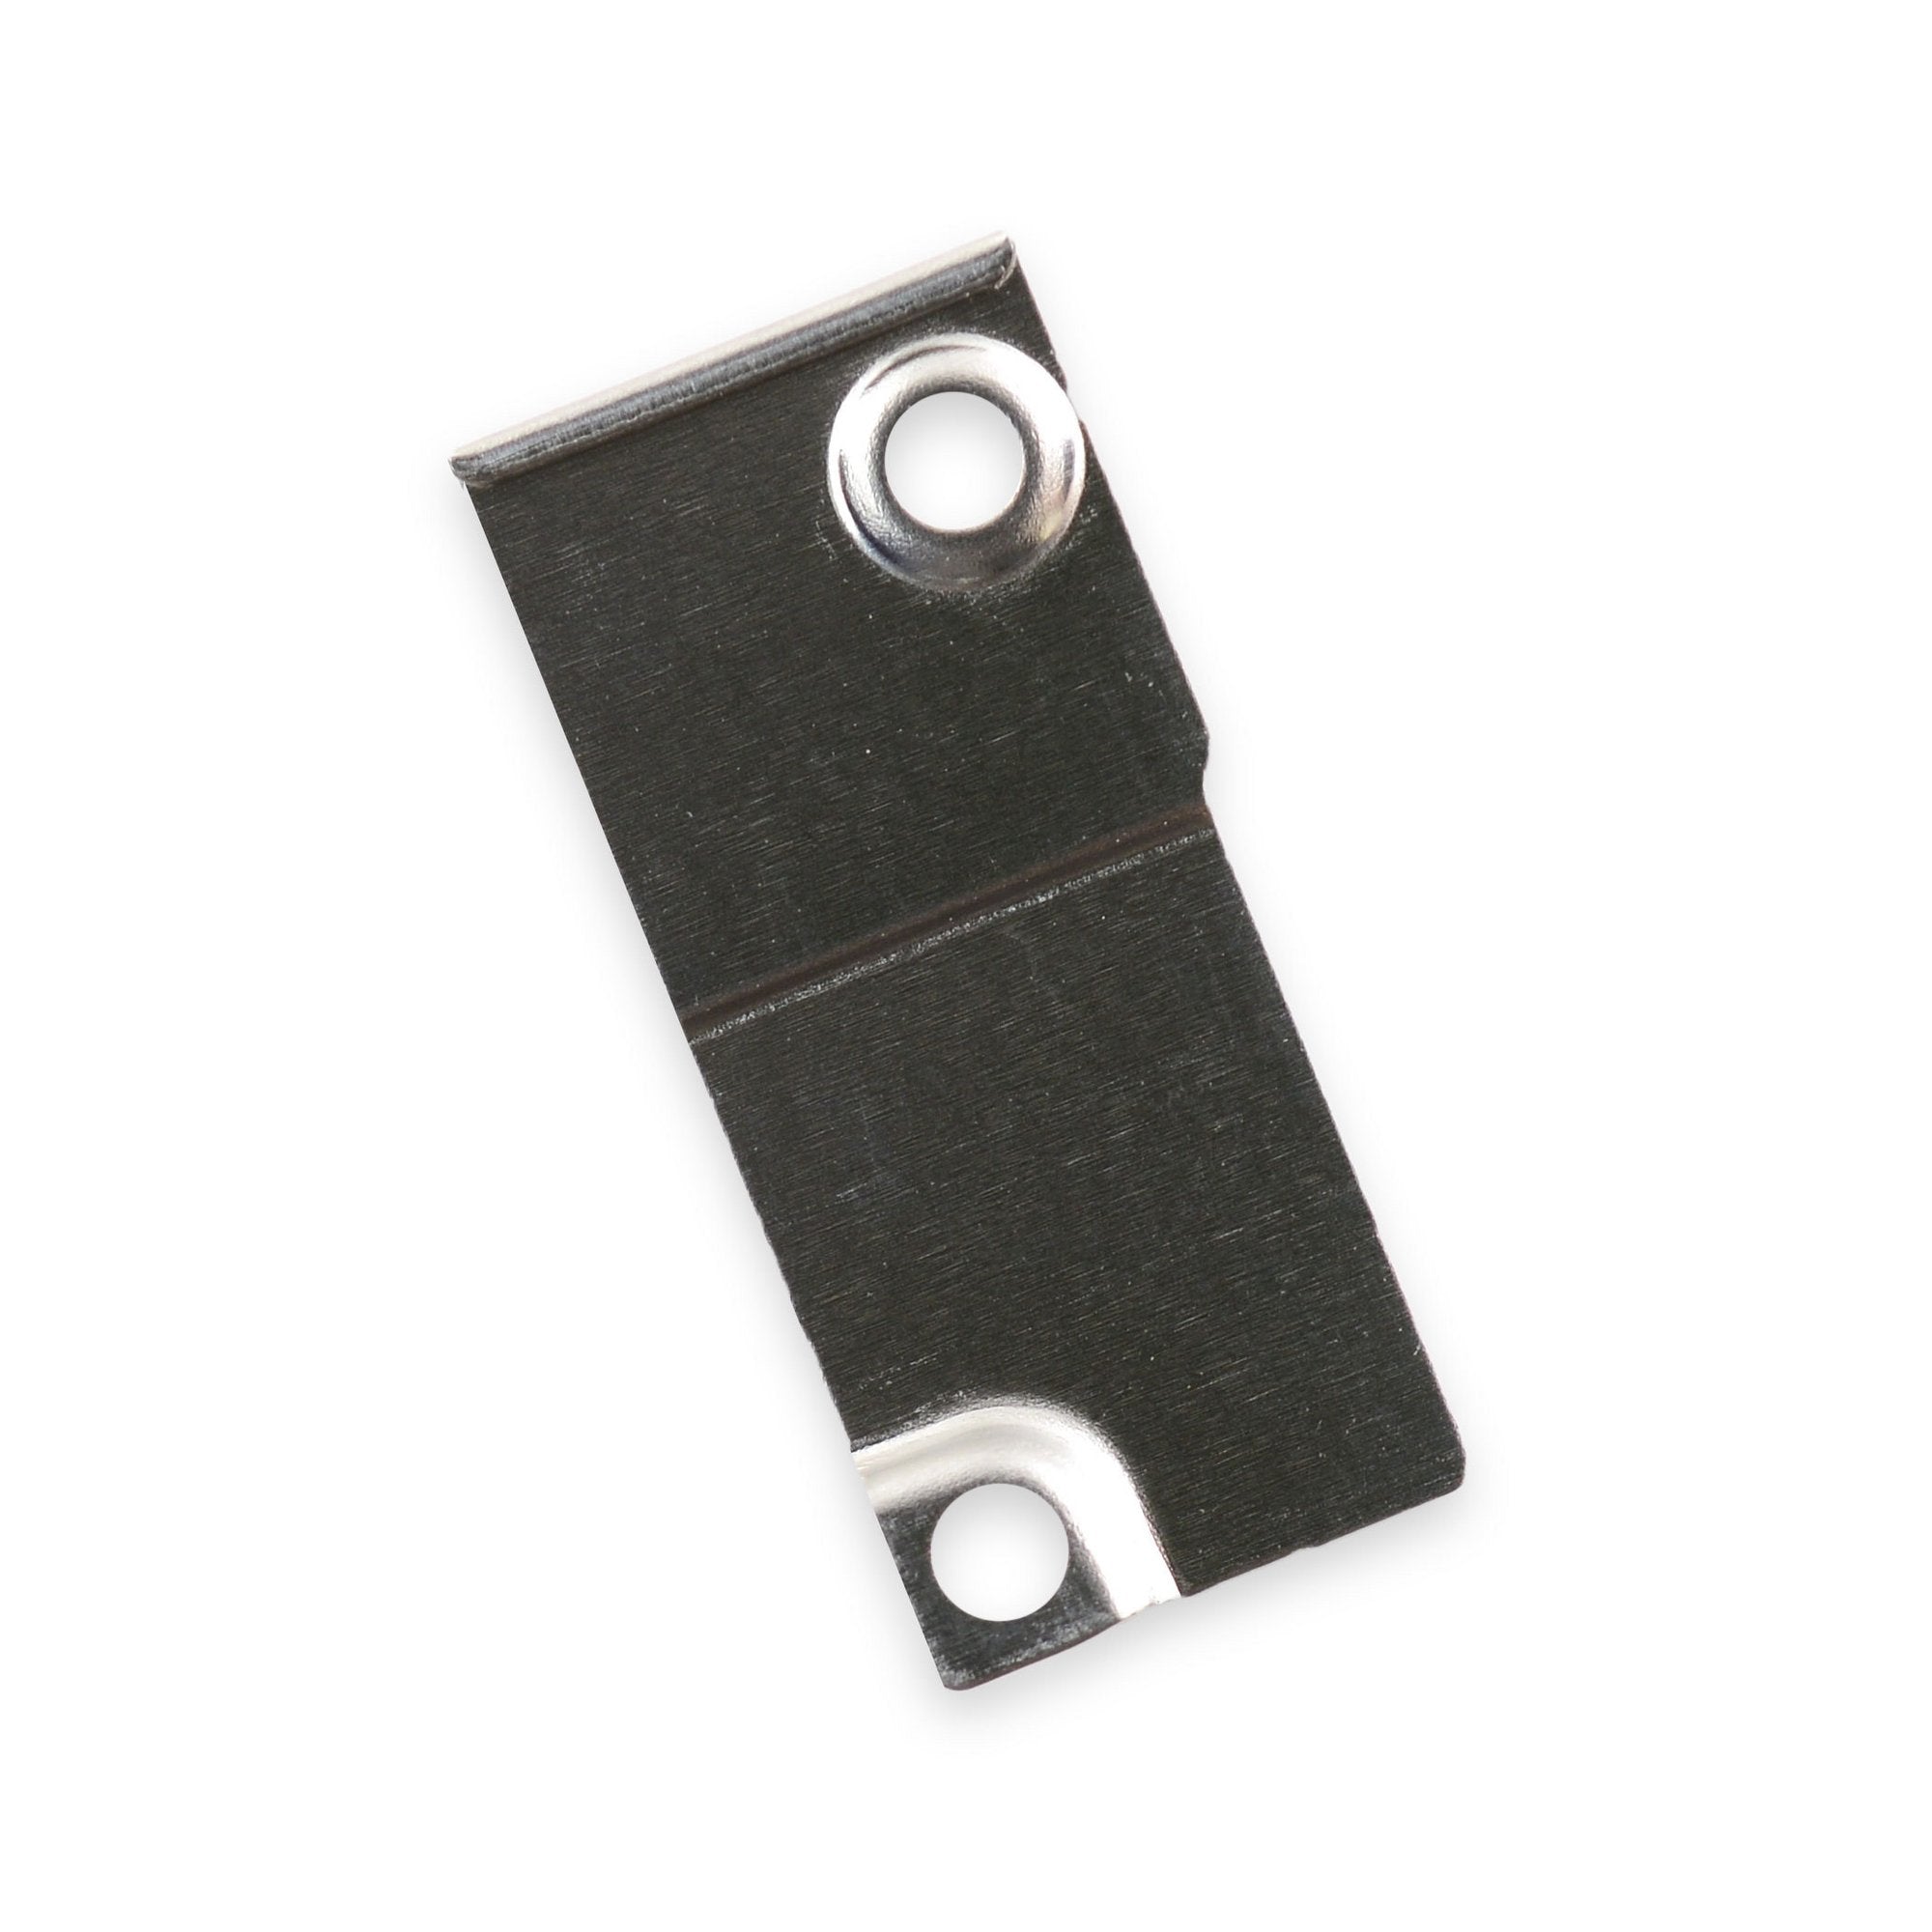 iPhone 6 Battery Connector Bracket